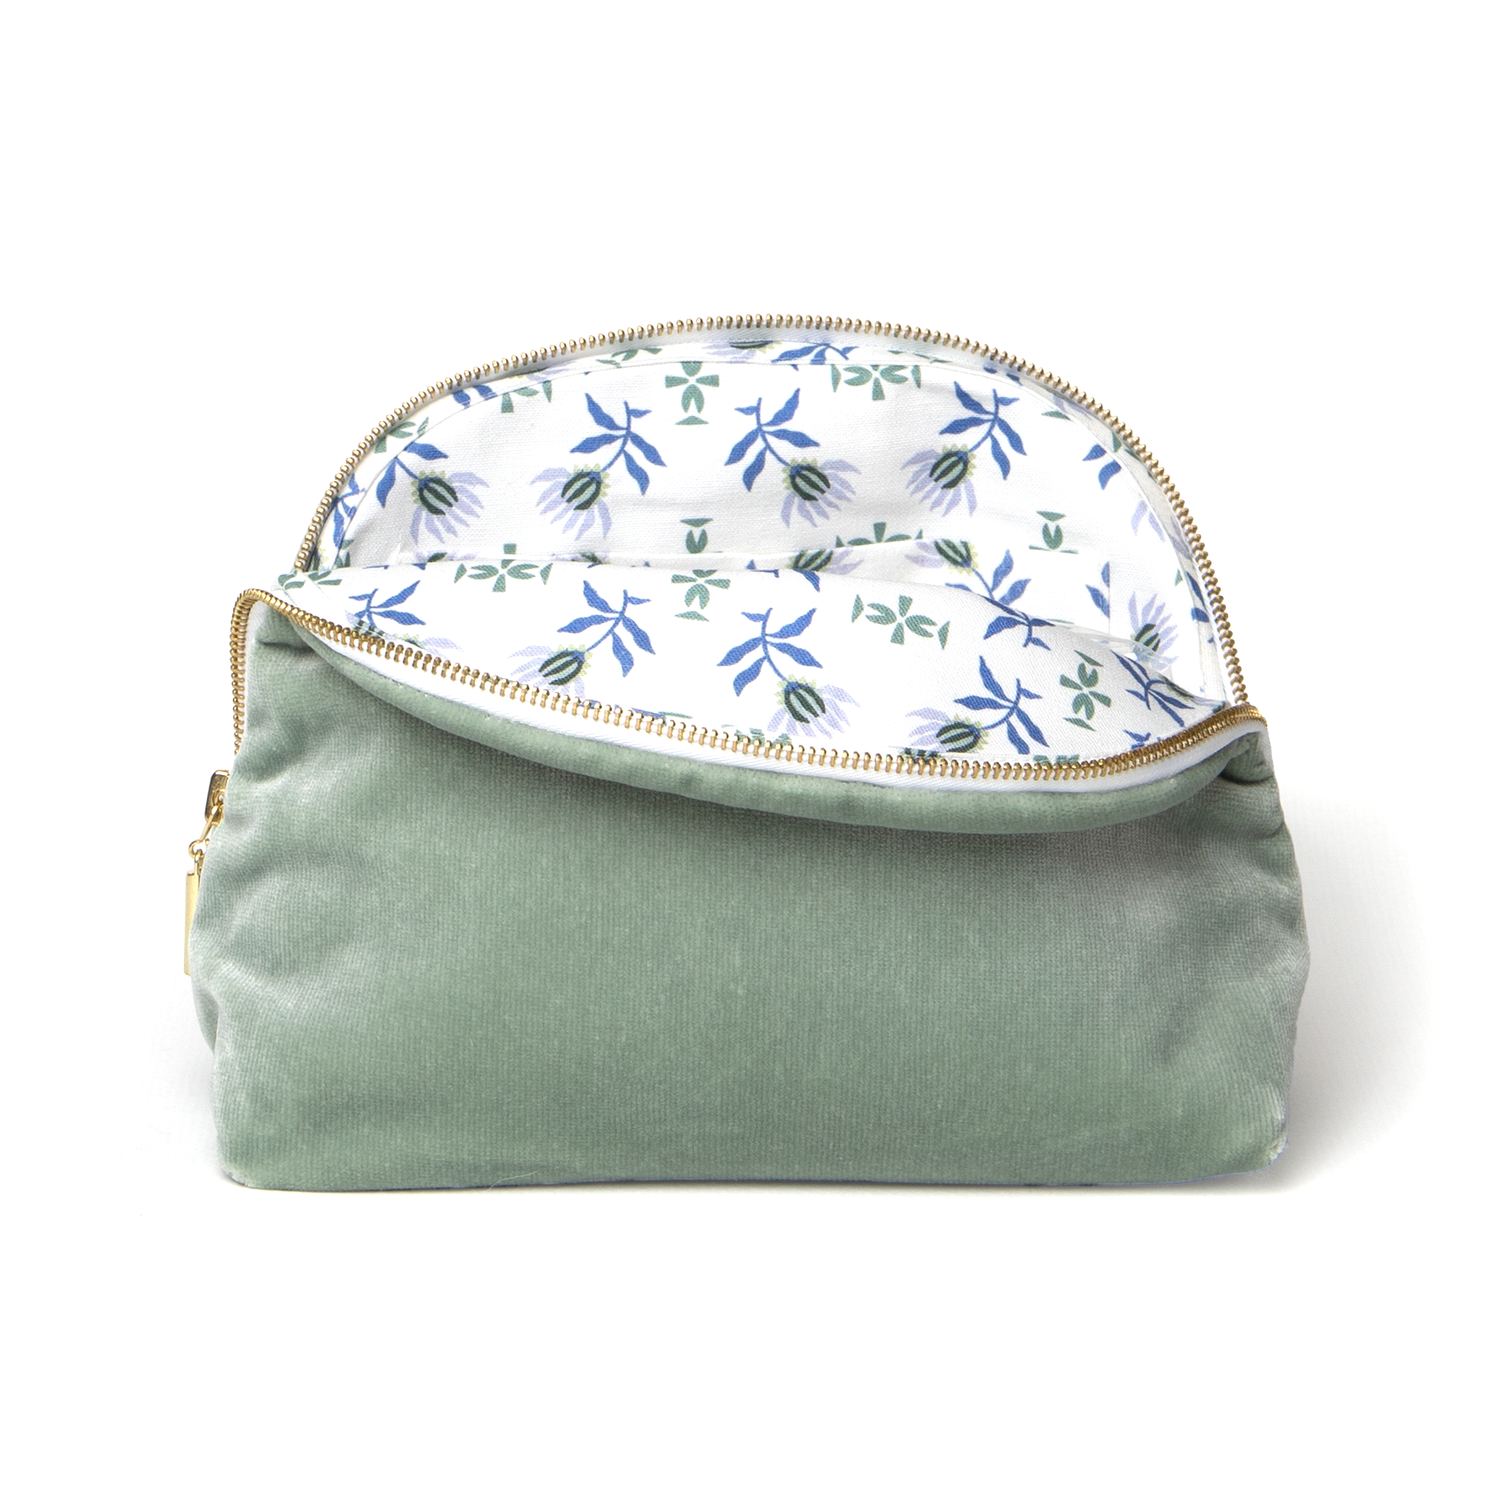 Pencil pouch - Floral Print - Bags By The Ocean